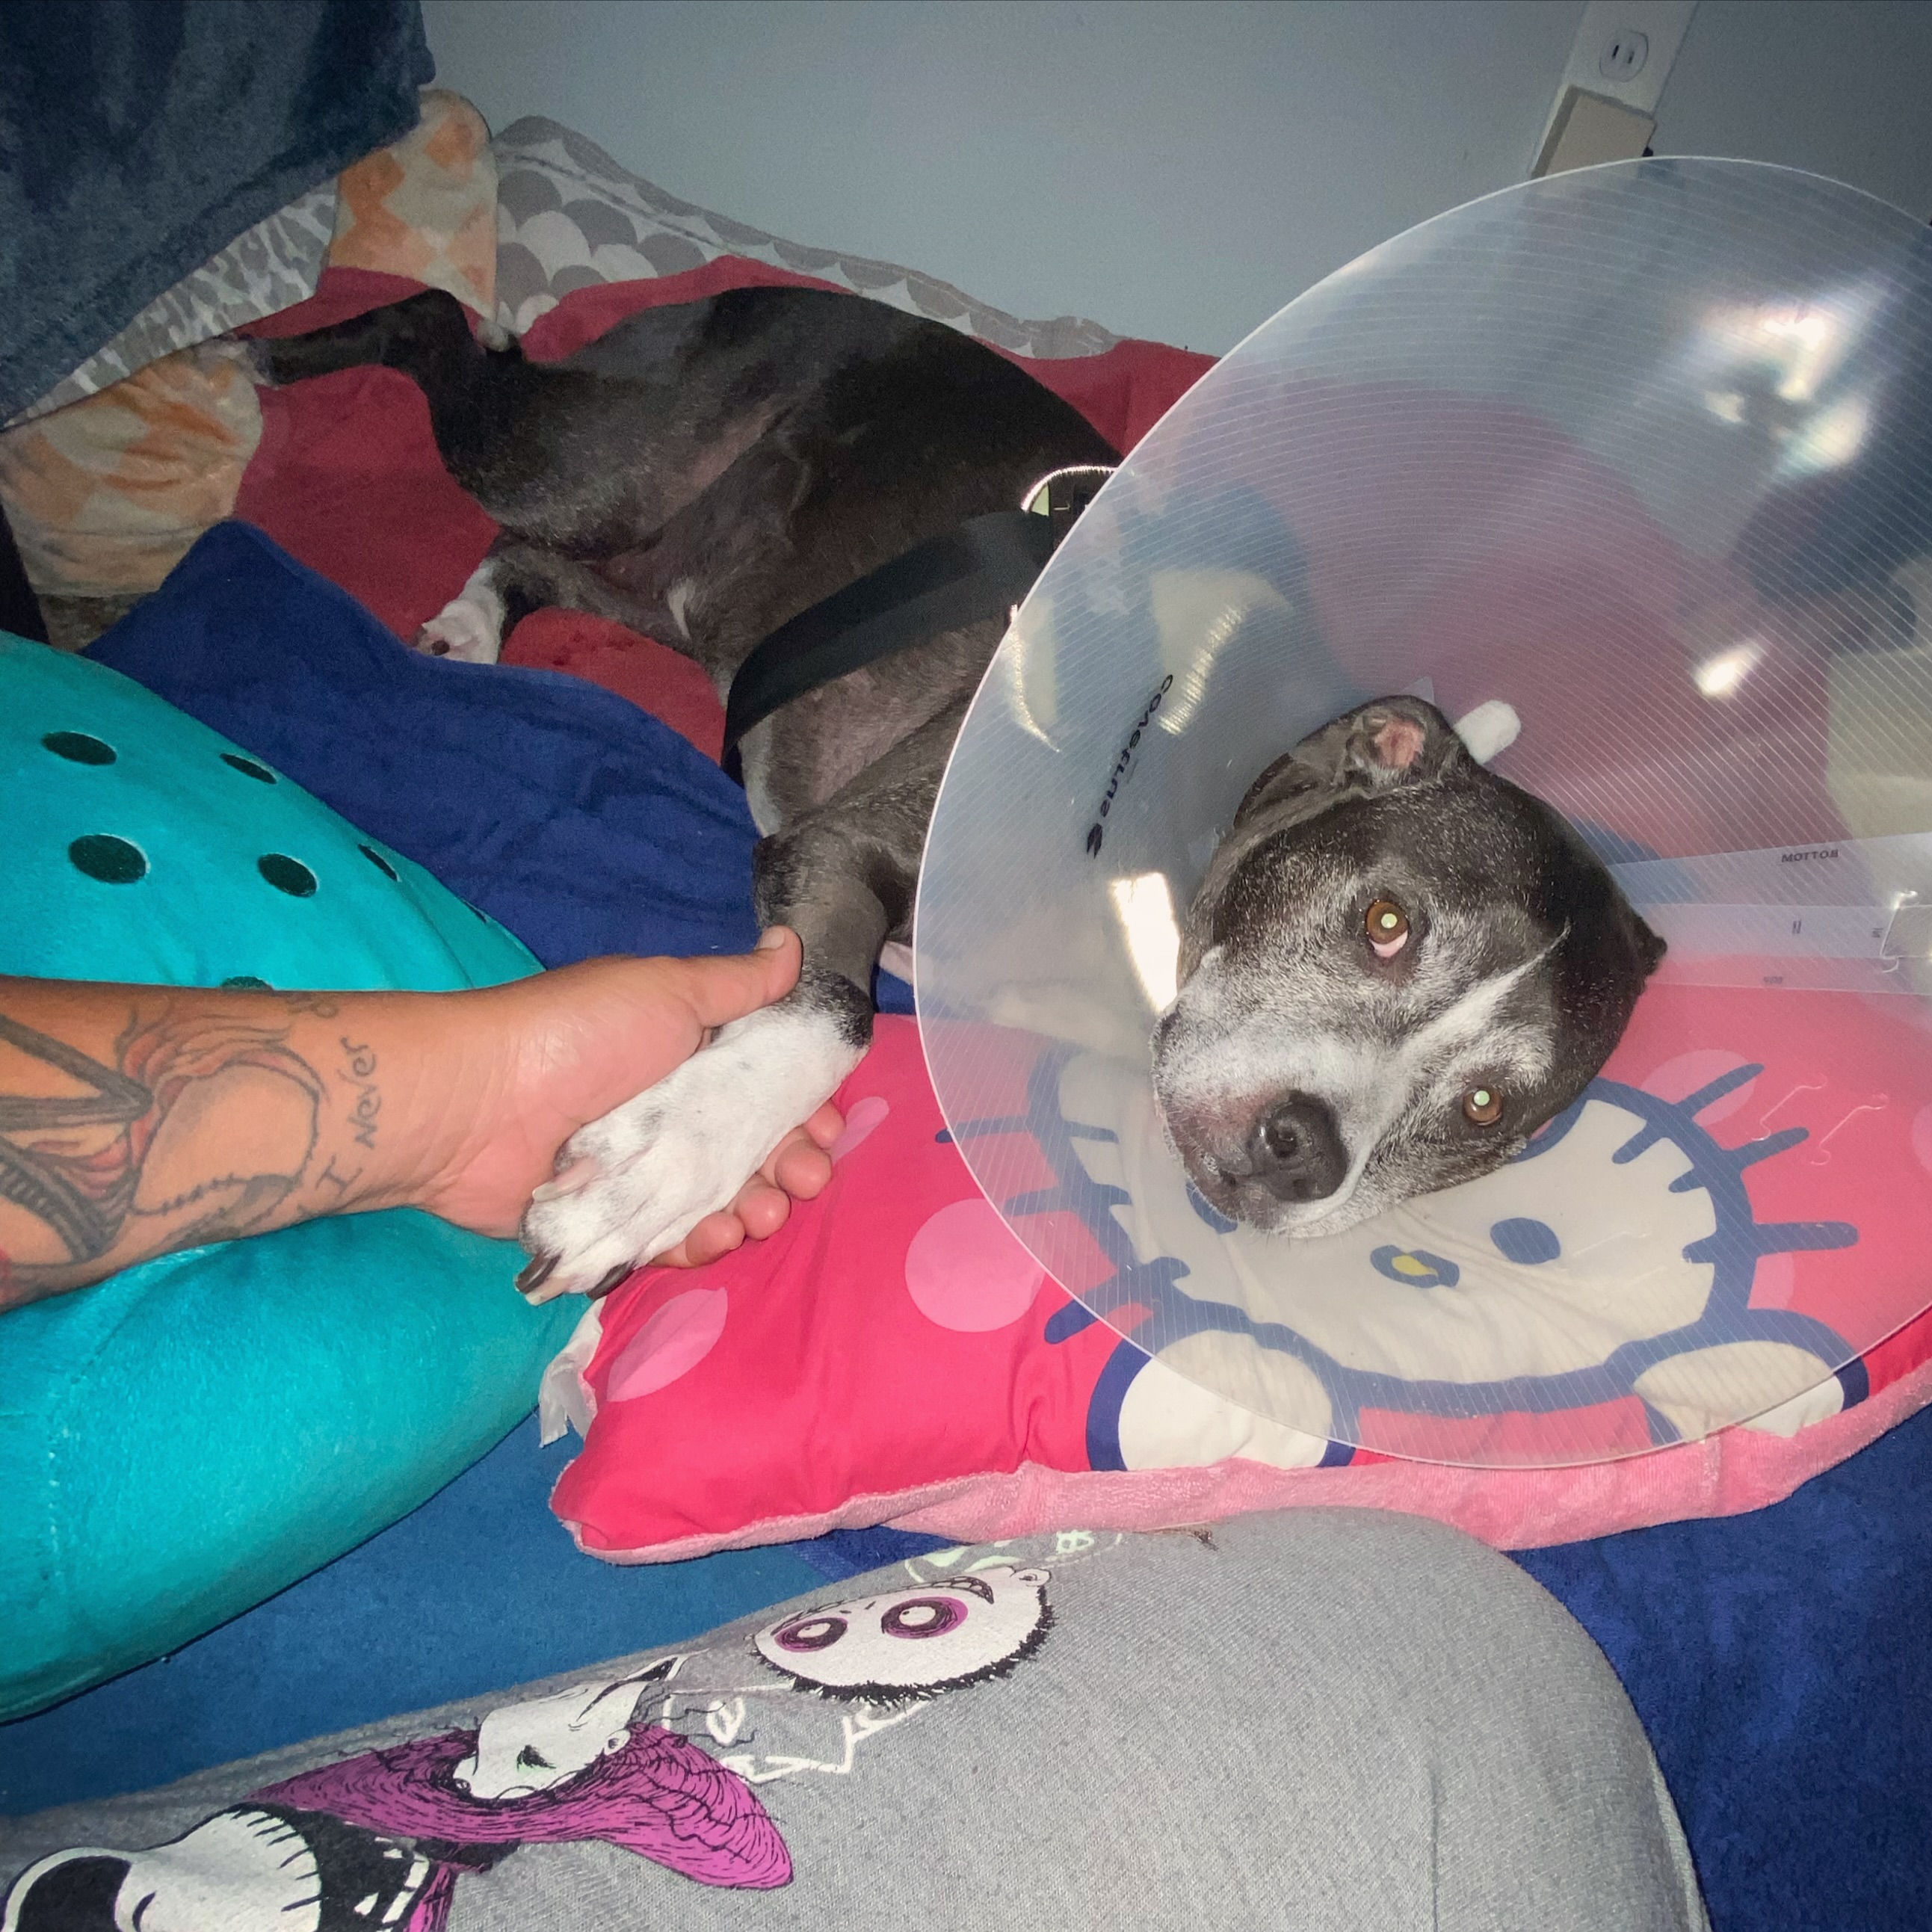 My poor baby had surgery yesterday, this was one of the hardest things we’ve been through she cried for 13 hours I hadn’t slept in 48 hours maybe more, I was crying she was crying but todays another day and she’s hanging in there so hoping tonight she’s can get some sleep